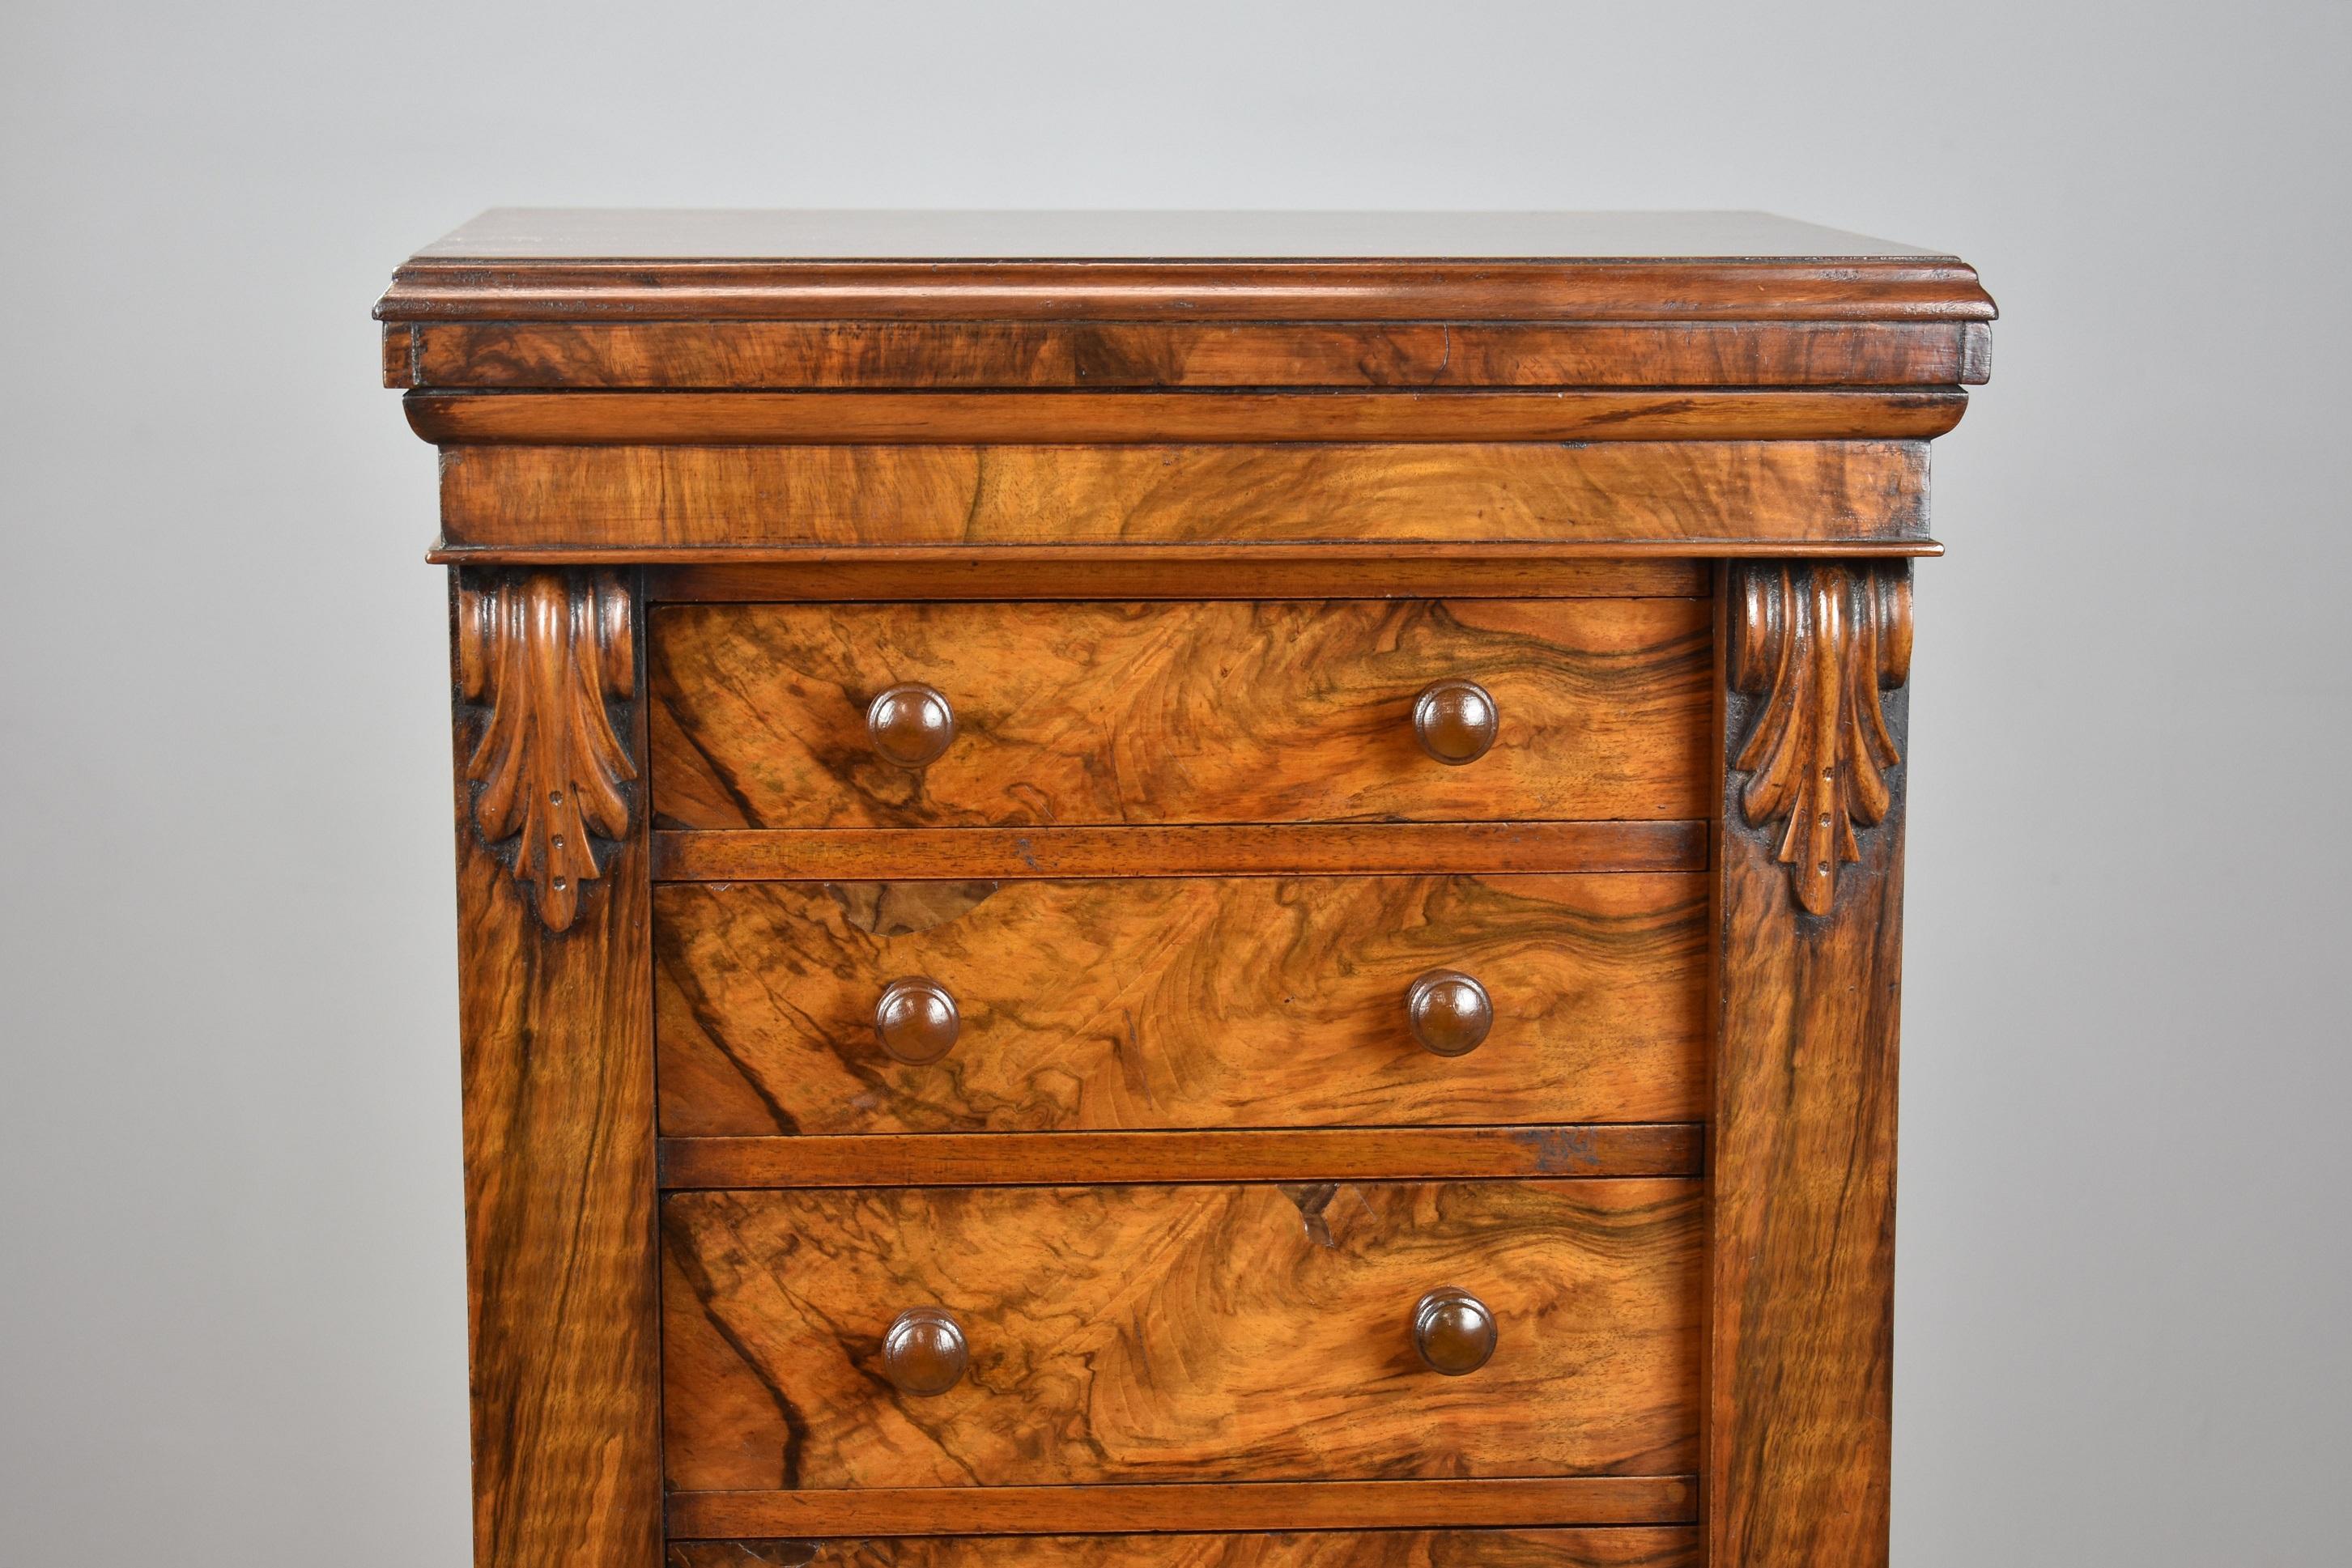 Victorian walnut wellington chest in very nice condition having been polished by hand, the chest has leaf carvings to the top and seven graduated drawers which all lock when the side panel is closed, the chest stands on a plinth base. Complete with